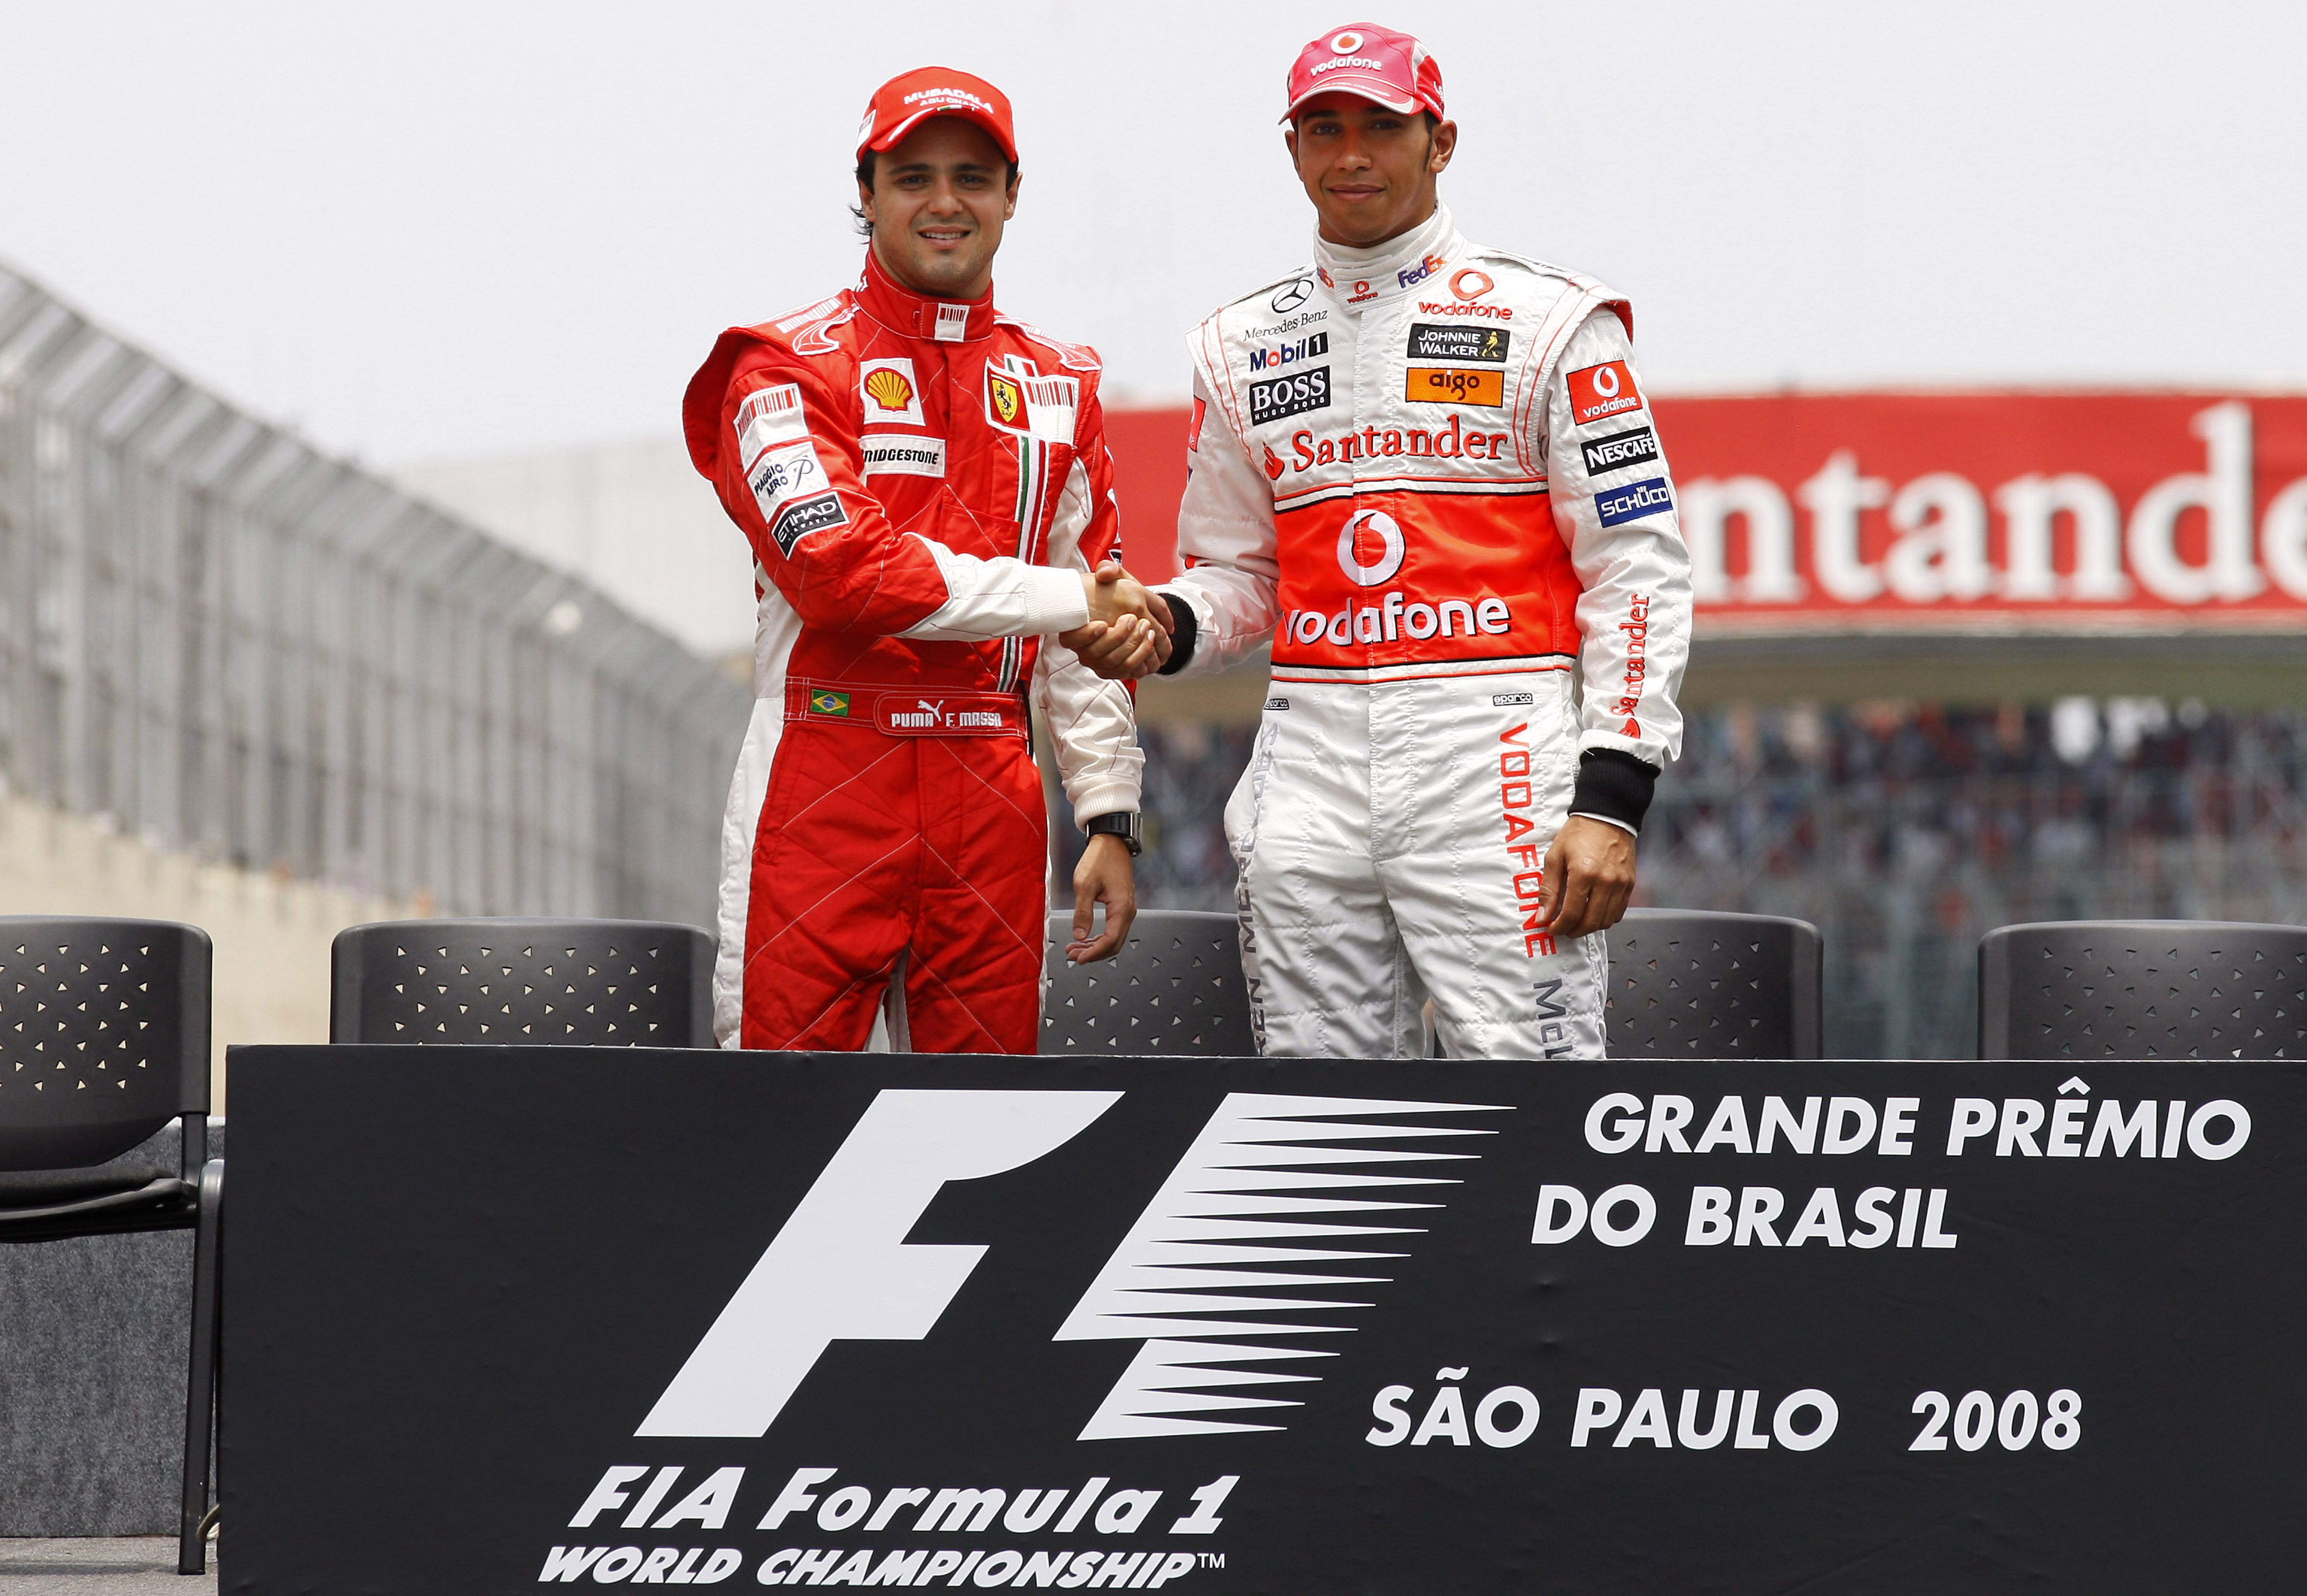 The 9 Times the F1 Drivers' Championship Was Decided By 1 Point